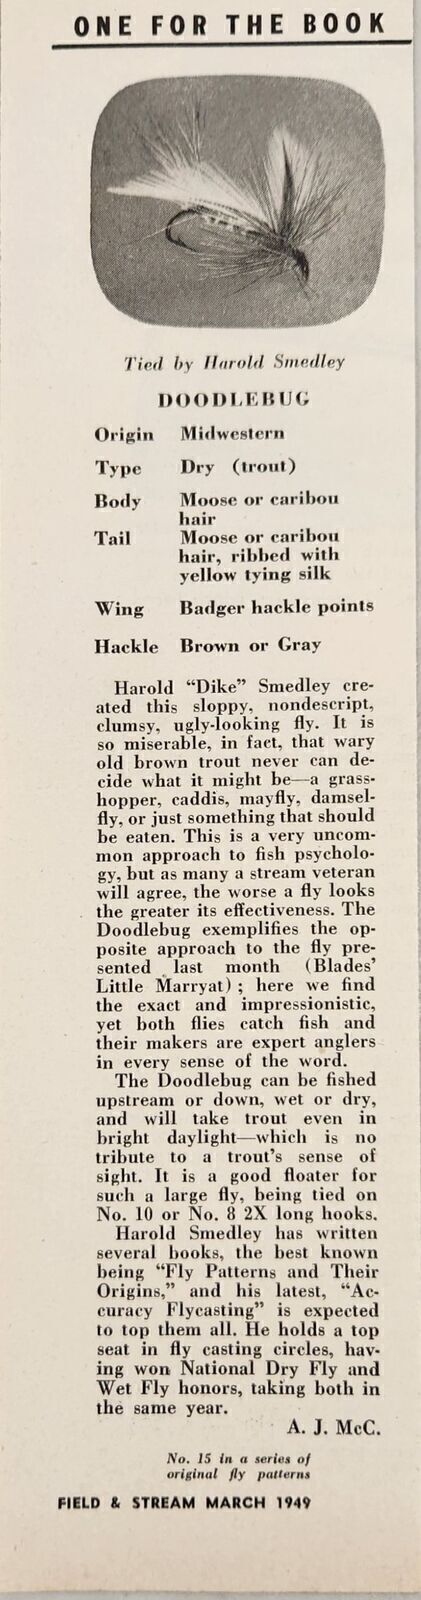 1949 Magazine Picture Doodlebug Midwestern Dry Trout Fishing Fly No 15 in Series